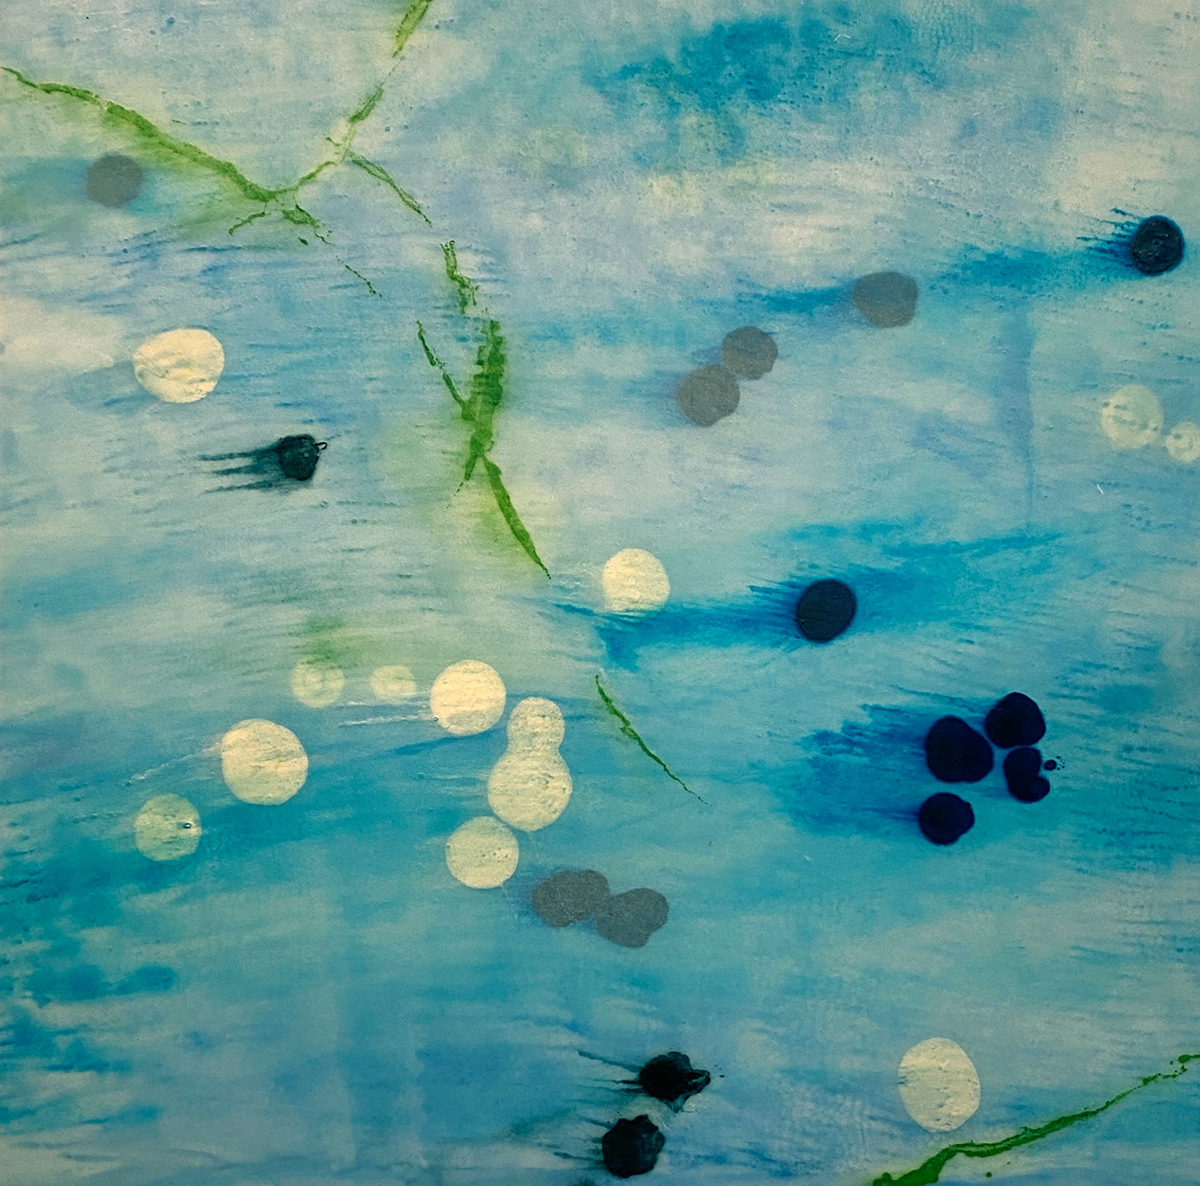 JANE GUTHRIDGE - COLOR OF WATER 46 - ENCAUSTIC ON MULBERRY PAPER - 18 x 18